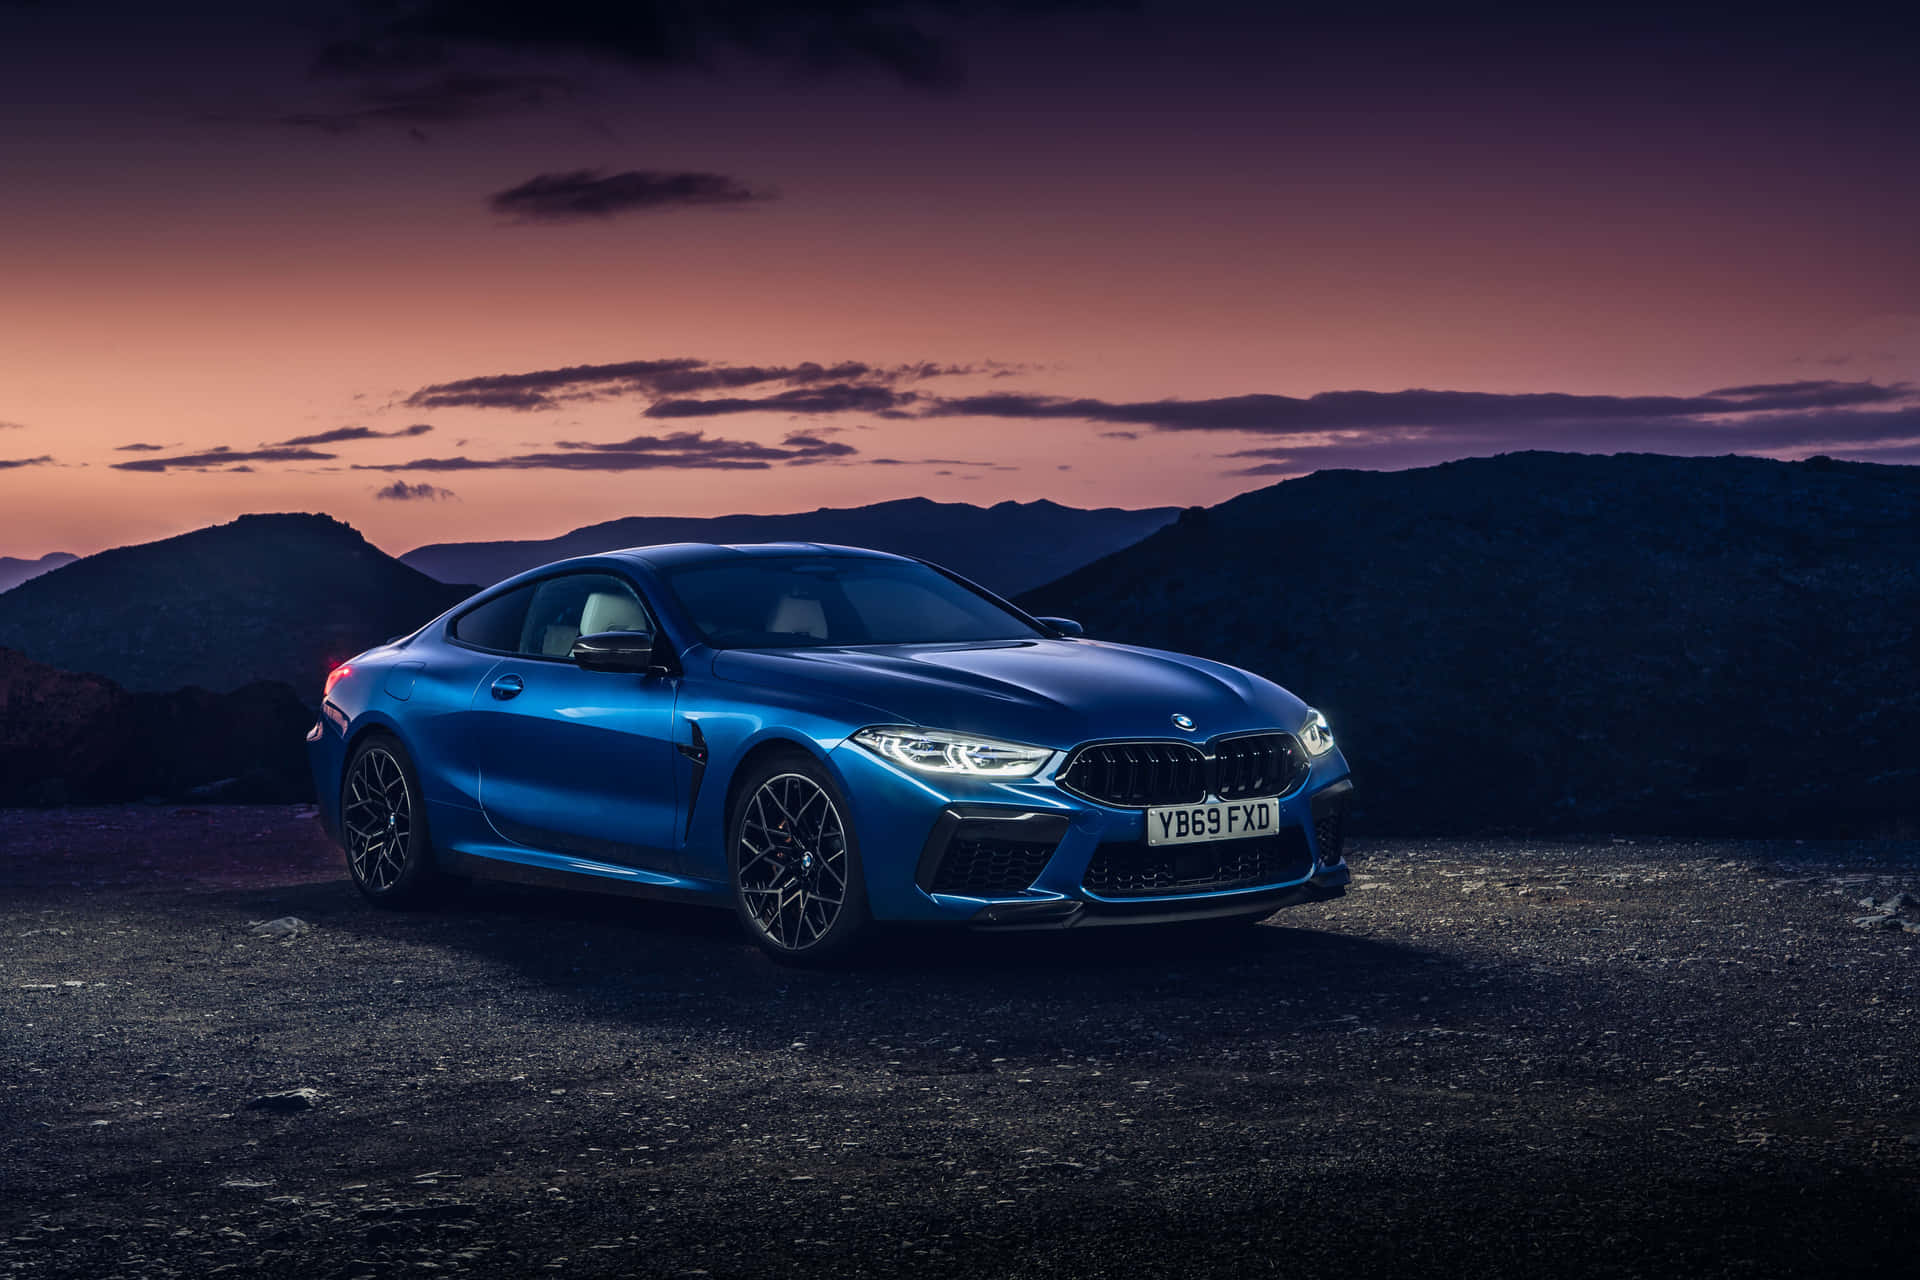 The New Bmw M8 Coupe Is Shown In The Evening Light Wallpaper